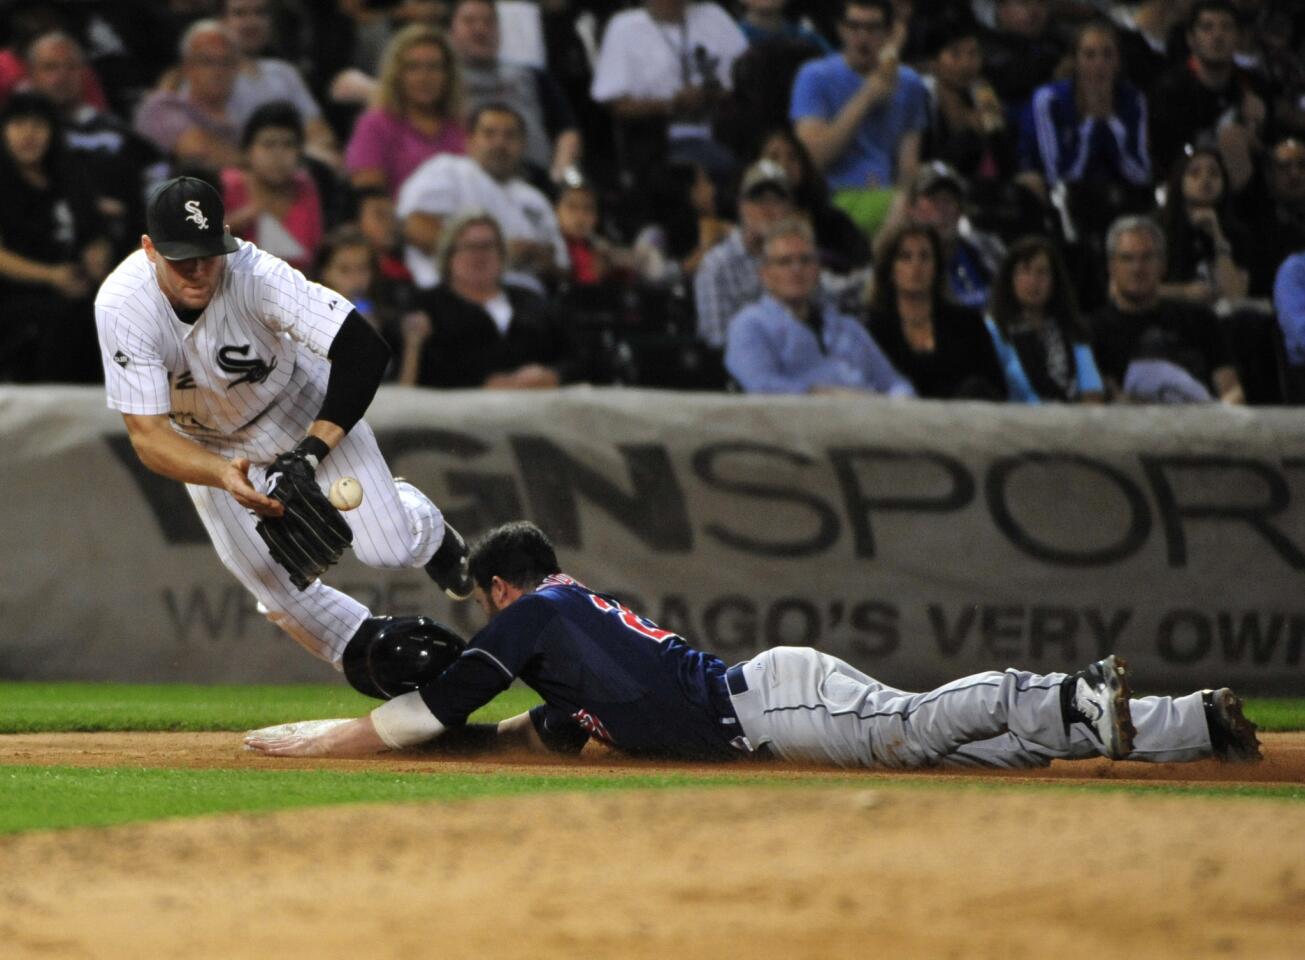 The Indians' Jason Kipnis is safe at third base as Conor Gillaspie takes the throw during the sixth inning.